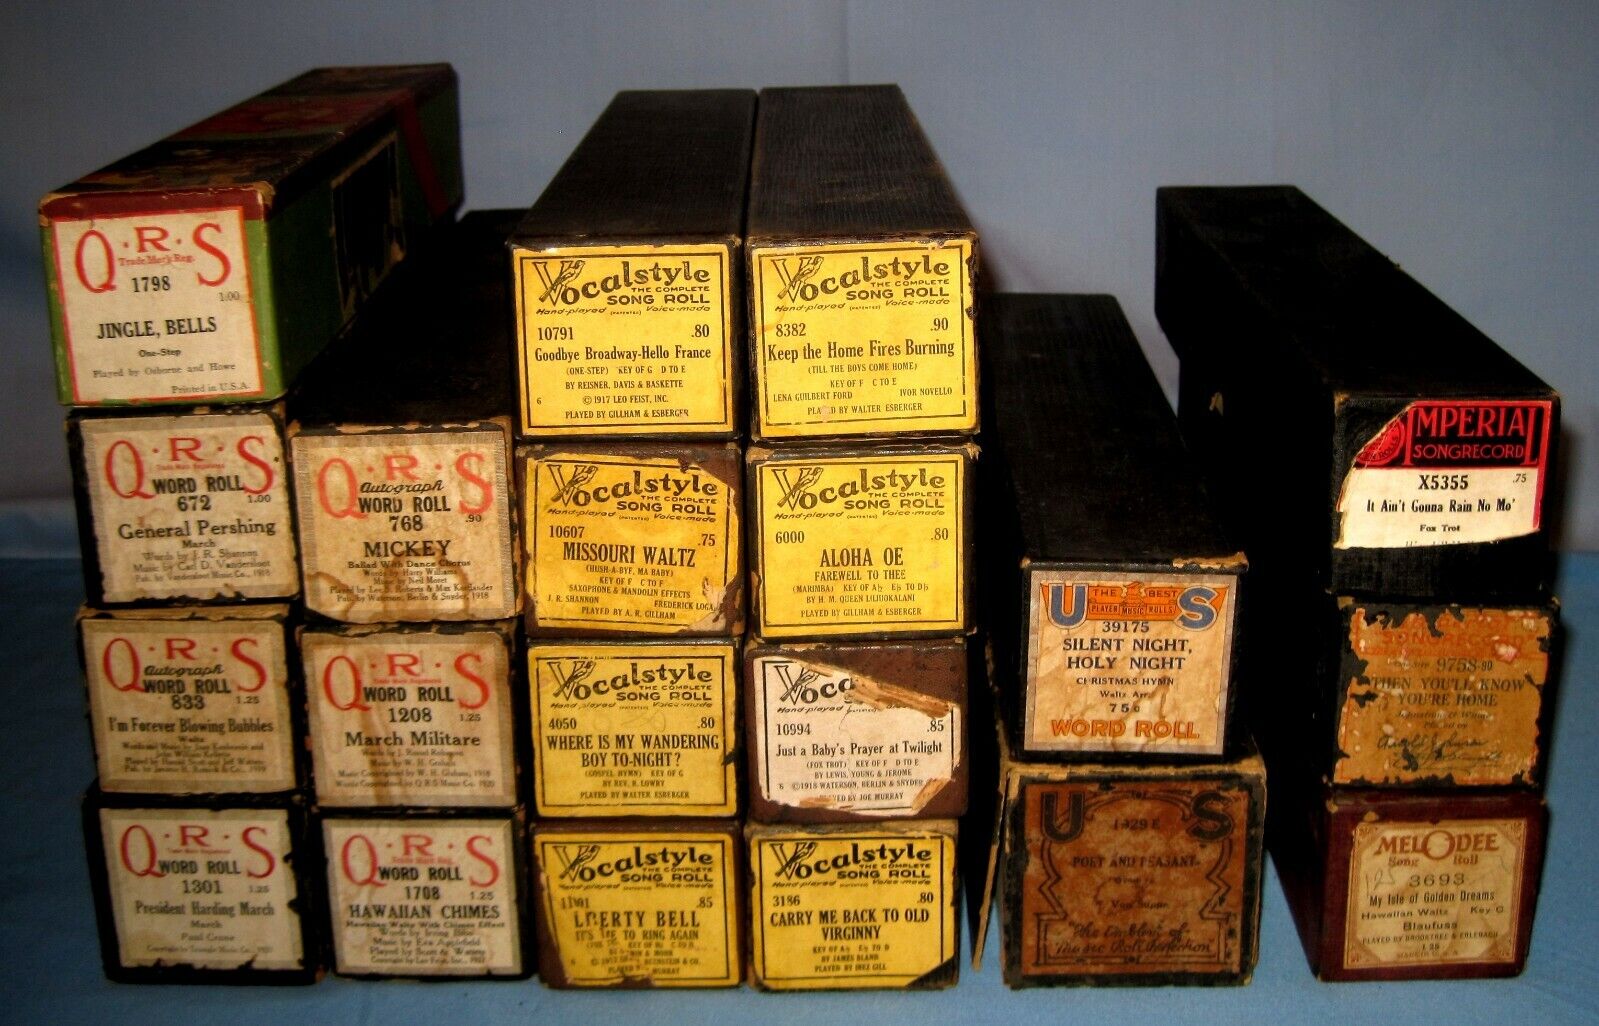 VTG/Antique Lot 20 Player Piano Rolls Music Songs ORS/Vocal Style/US/Imperial ++ Assorted